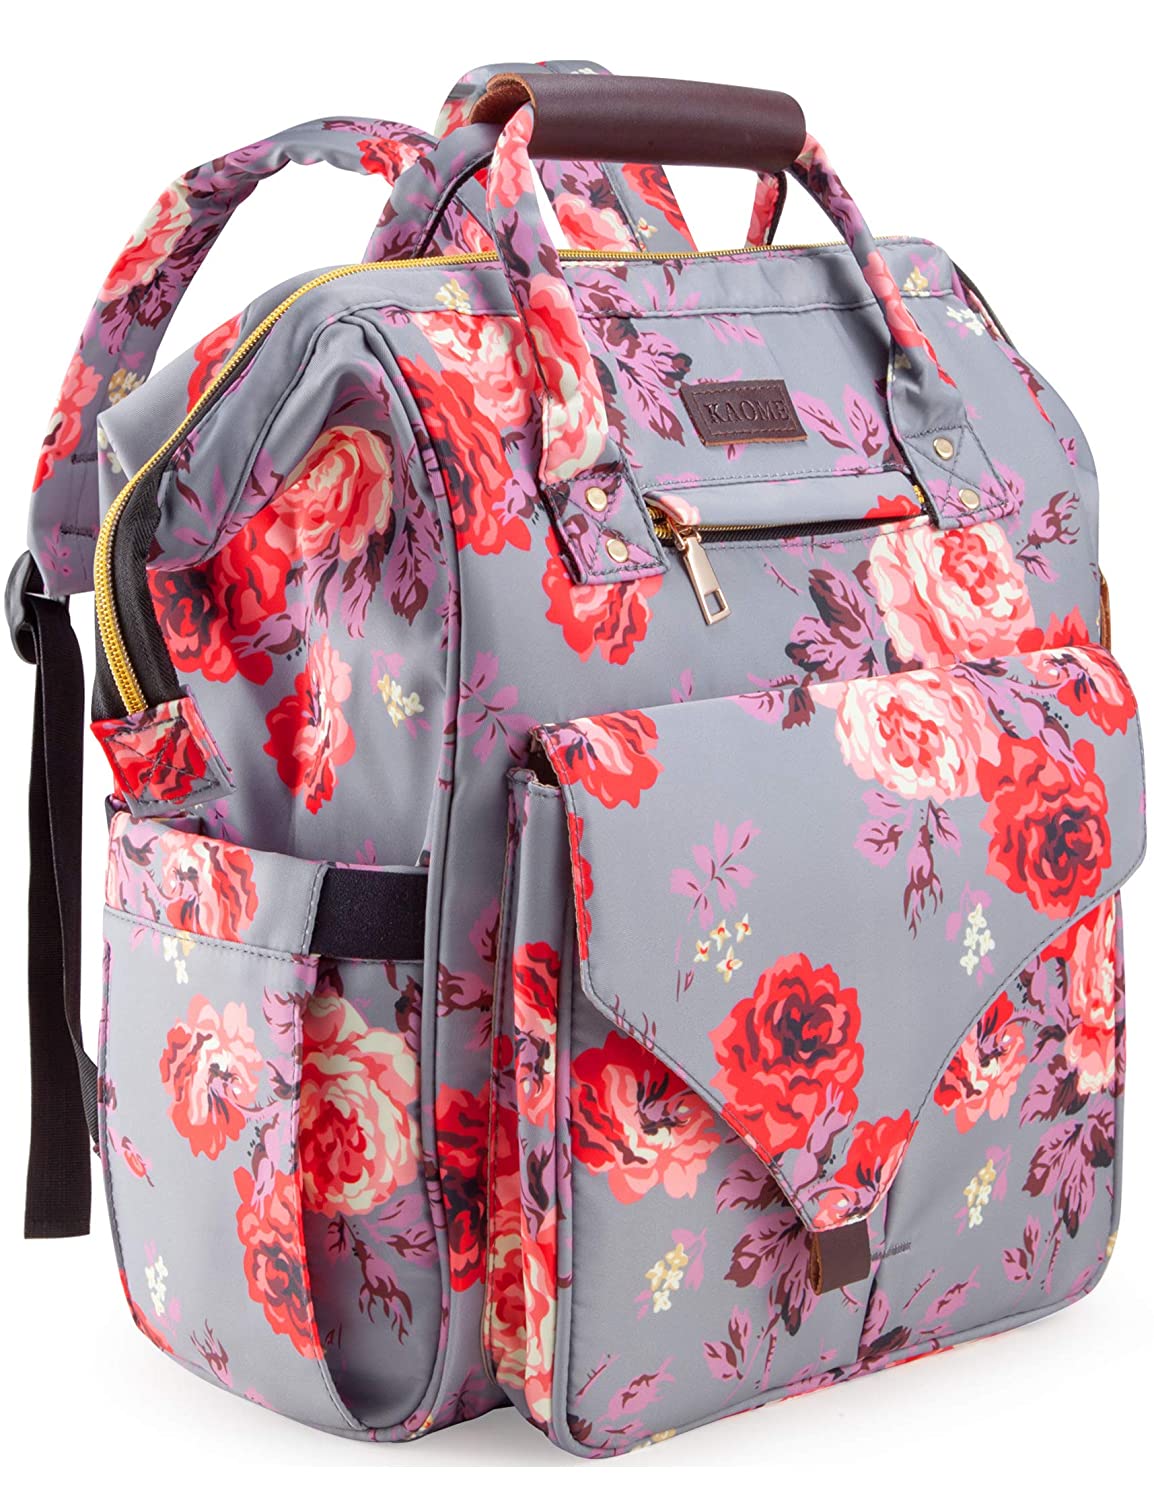 Amazon.com : Diaper Bag Backpack, Upgraded Kaome Large ...